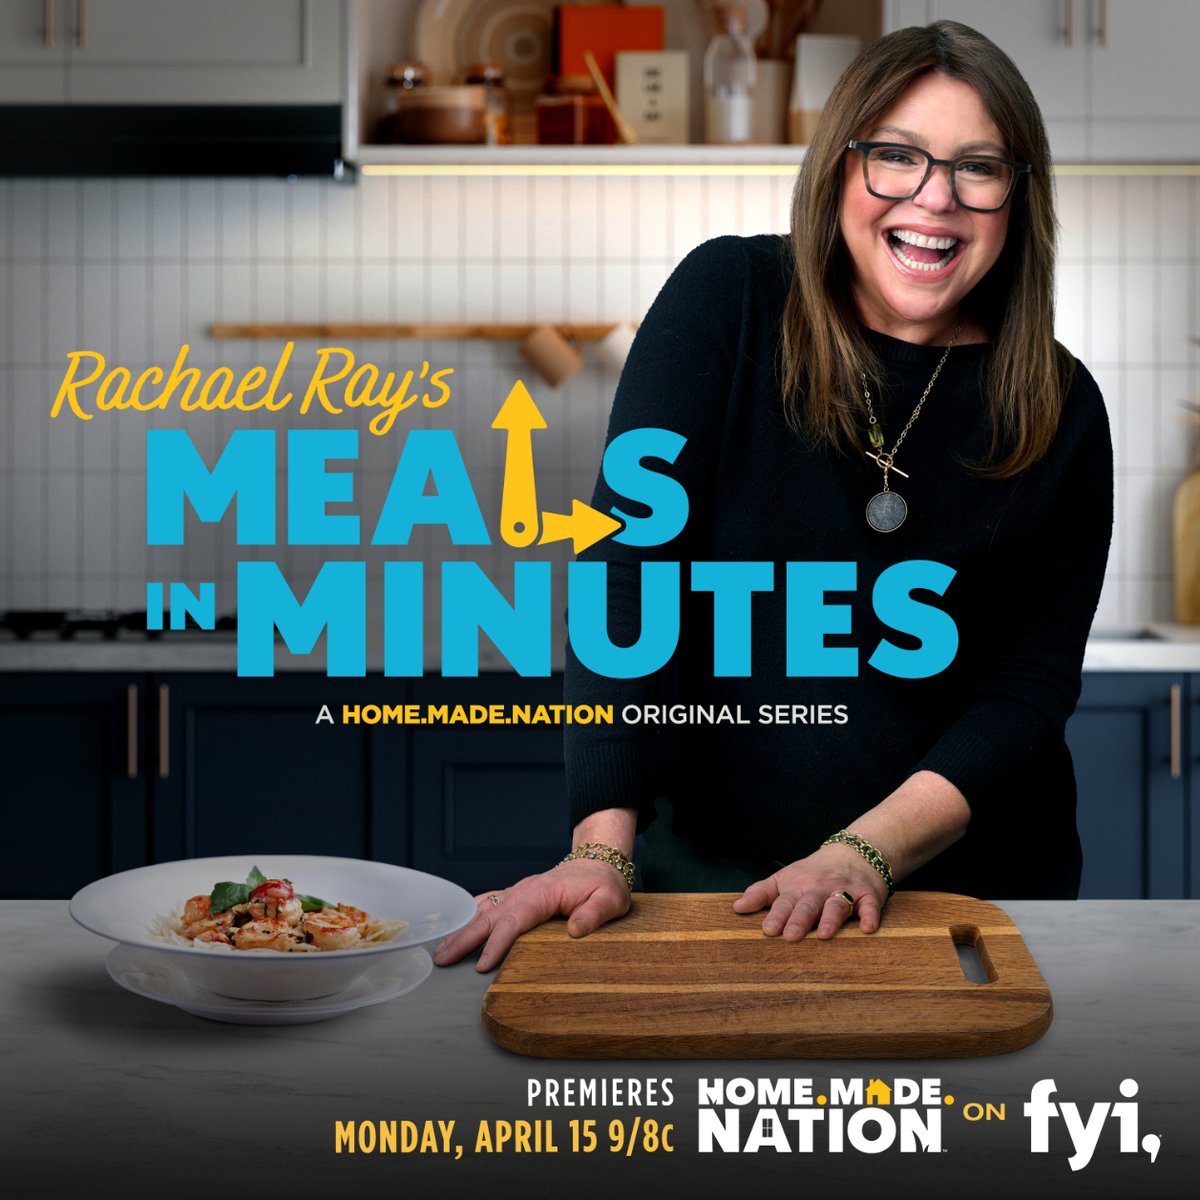 Rachael Ray’s Meals in Minutes is a fresh take on quick, easy, yummy meals! Brand new series premieres Monday, April 15th at 9/8c on FYI (@HomeMadeNation).